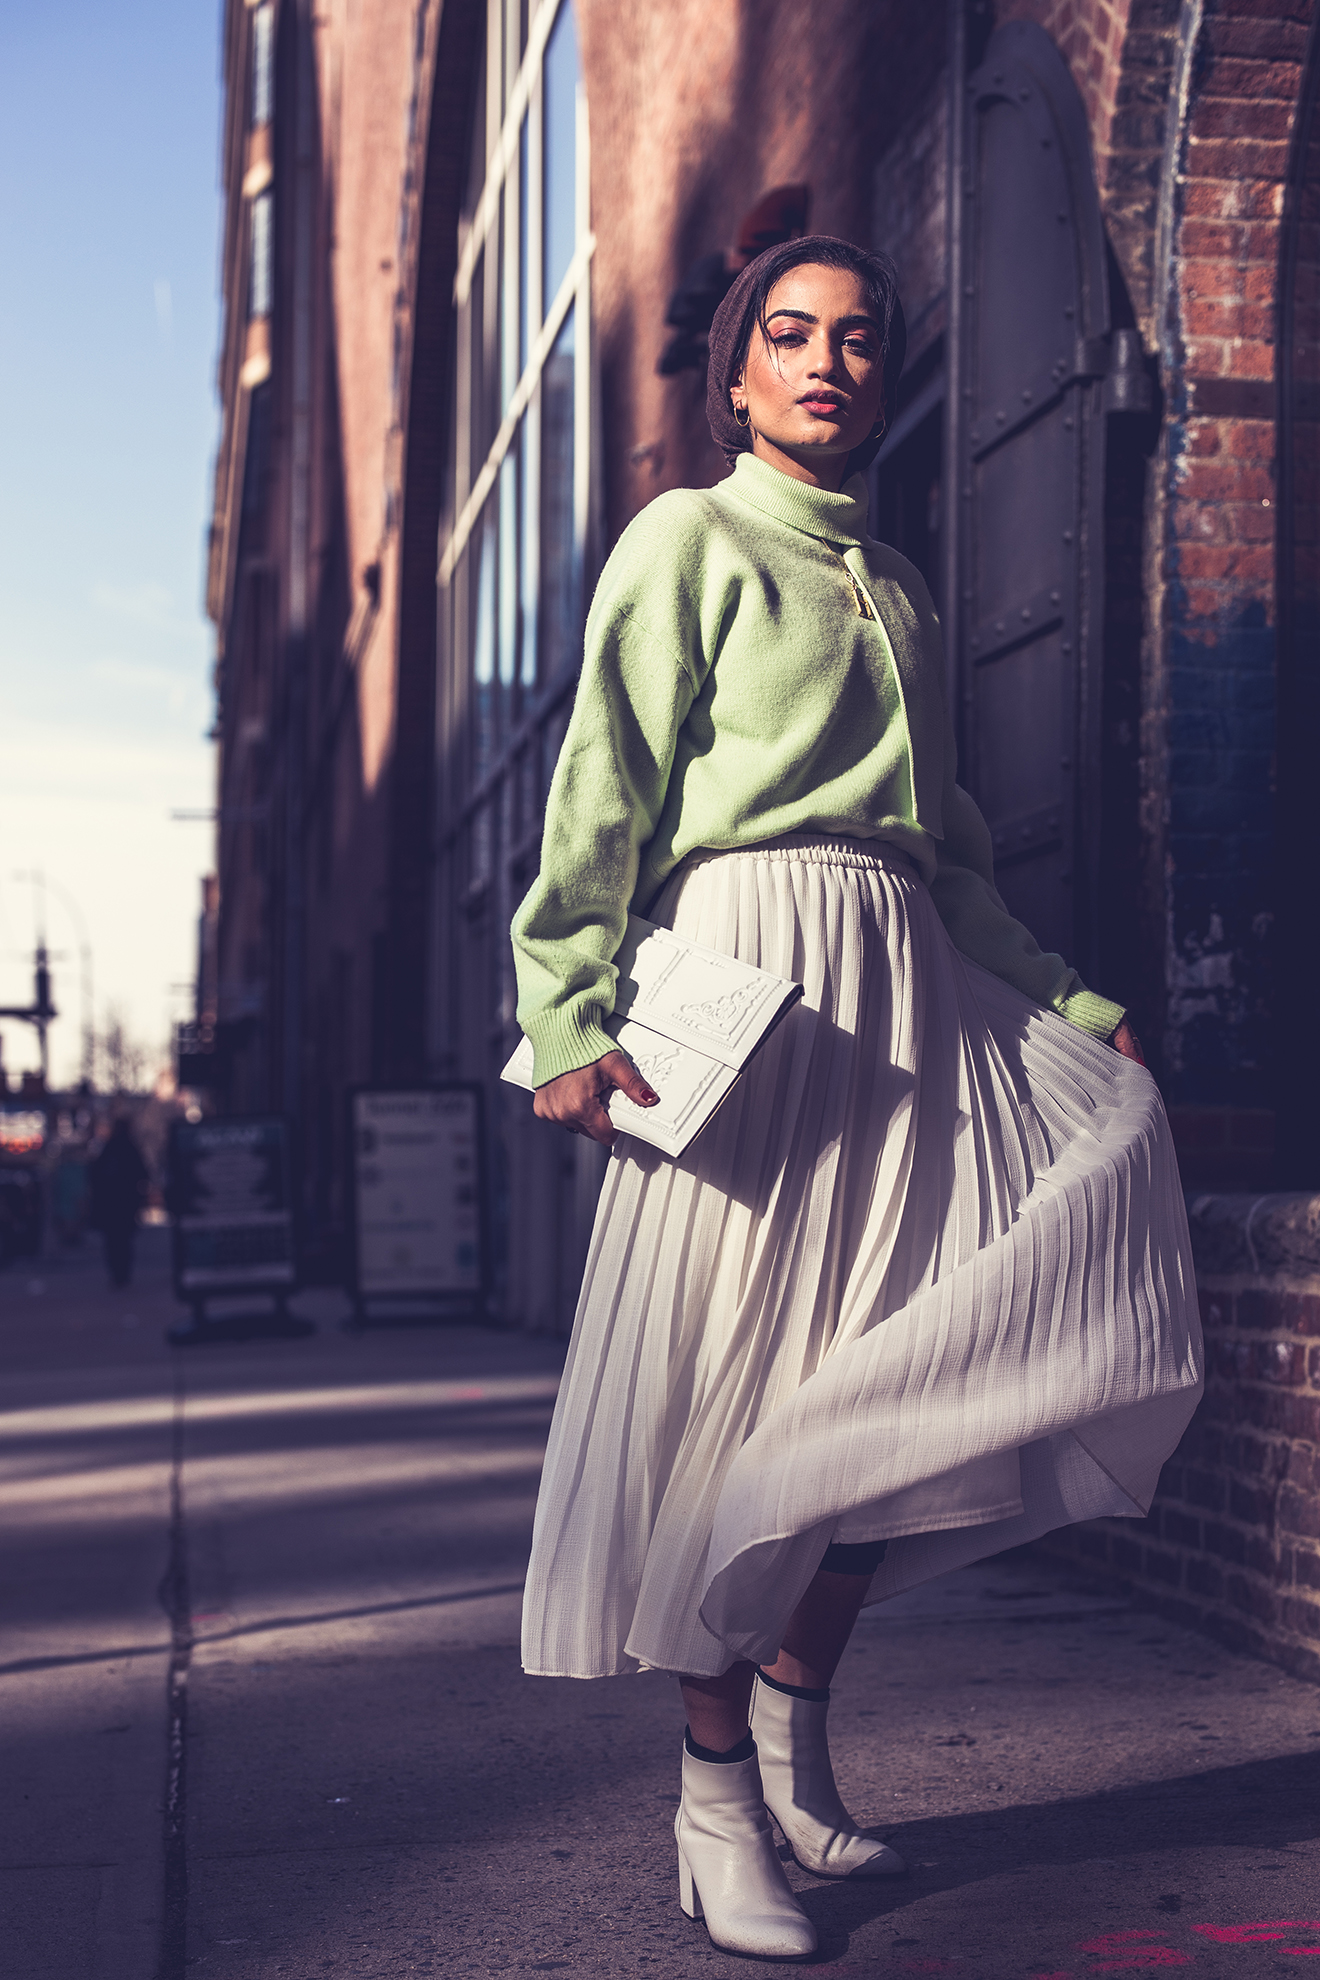 Dark haired model in a green cowel neck sweater and long white accordioned skirt posing on the sidewalk ear a large brick building